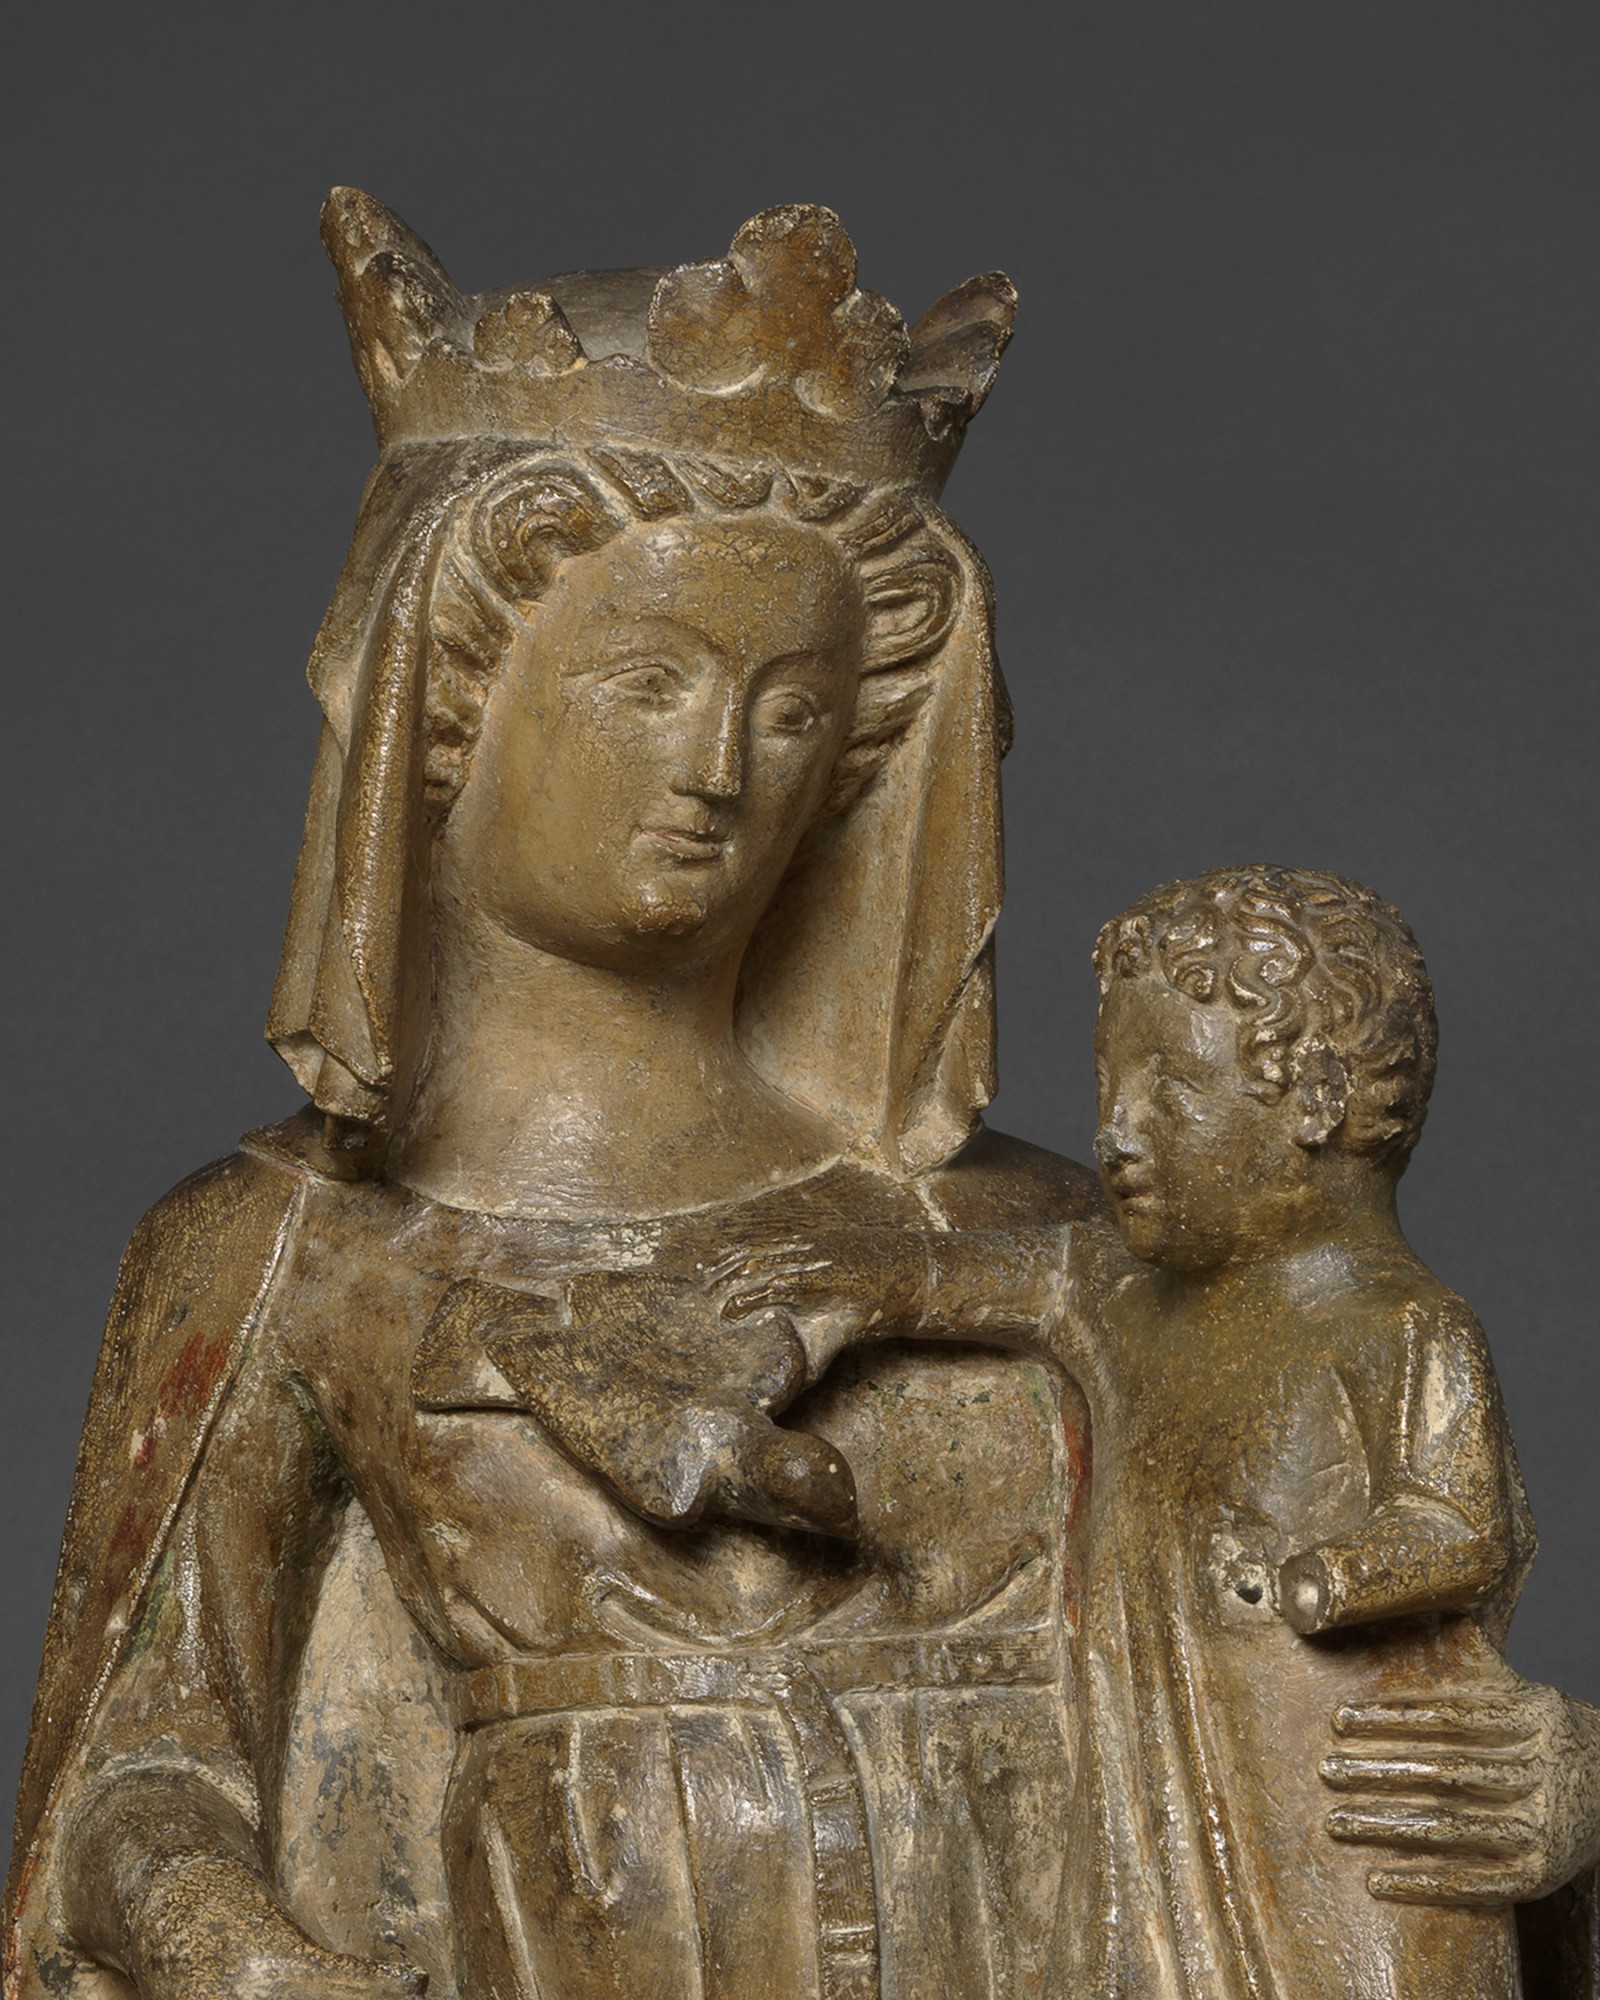 Enthroned Virgin and Child, France, Lorraine, c. 1330